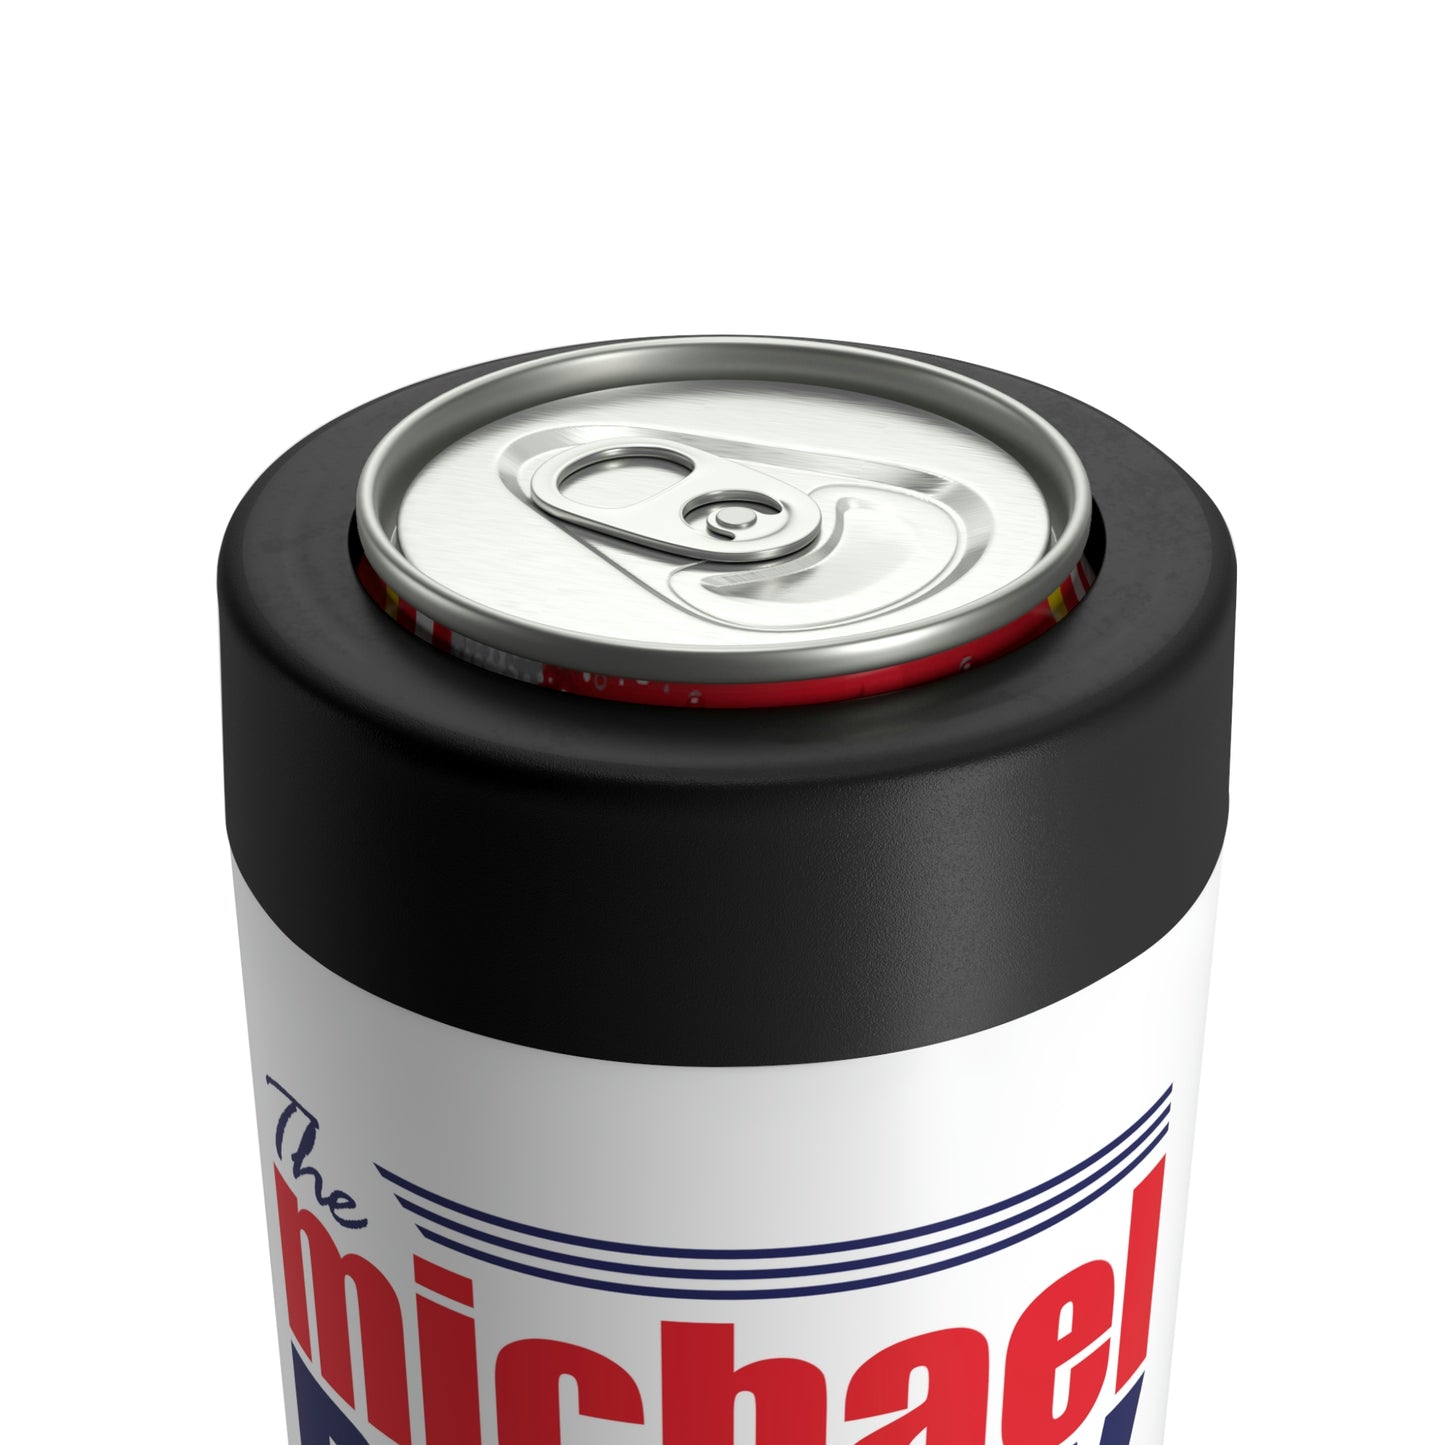 Official “Pop-A-Top” INSULATED Can Holder for Friday Drive Home Revelry